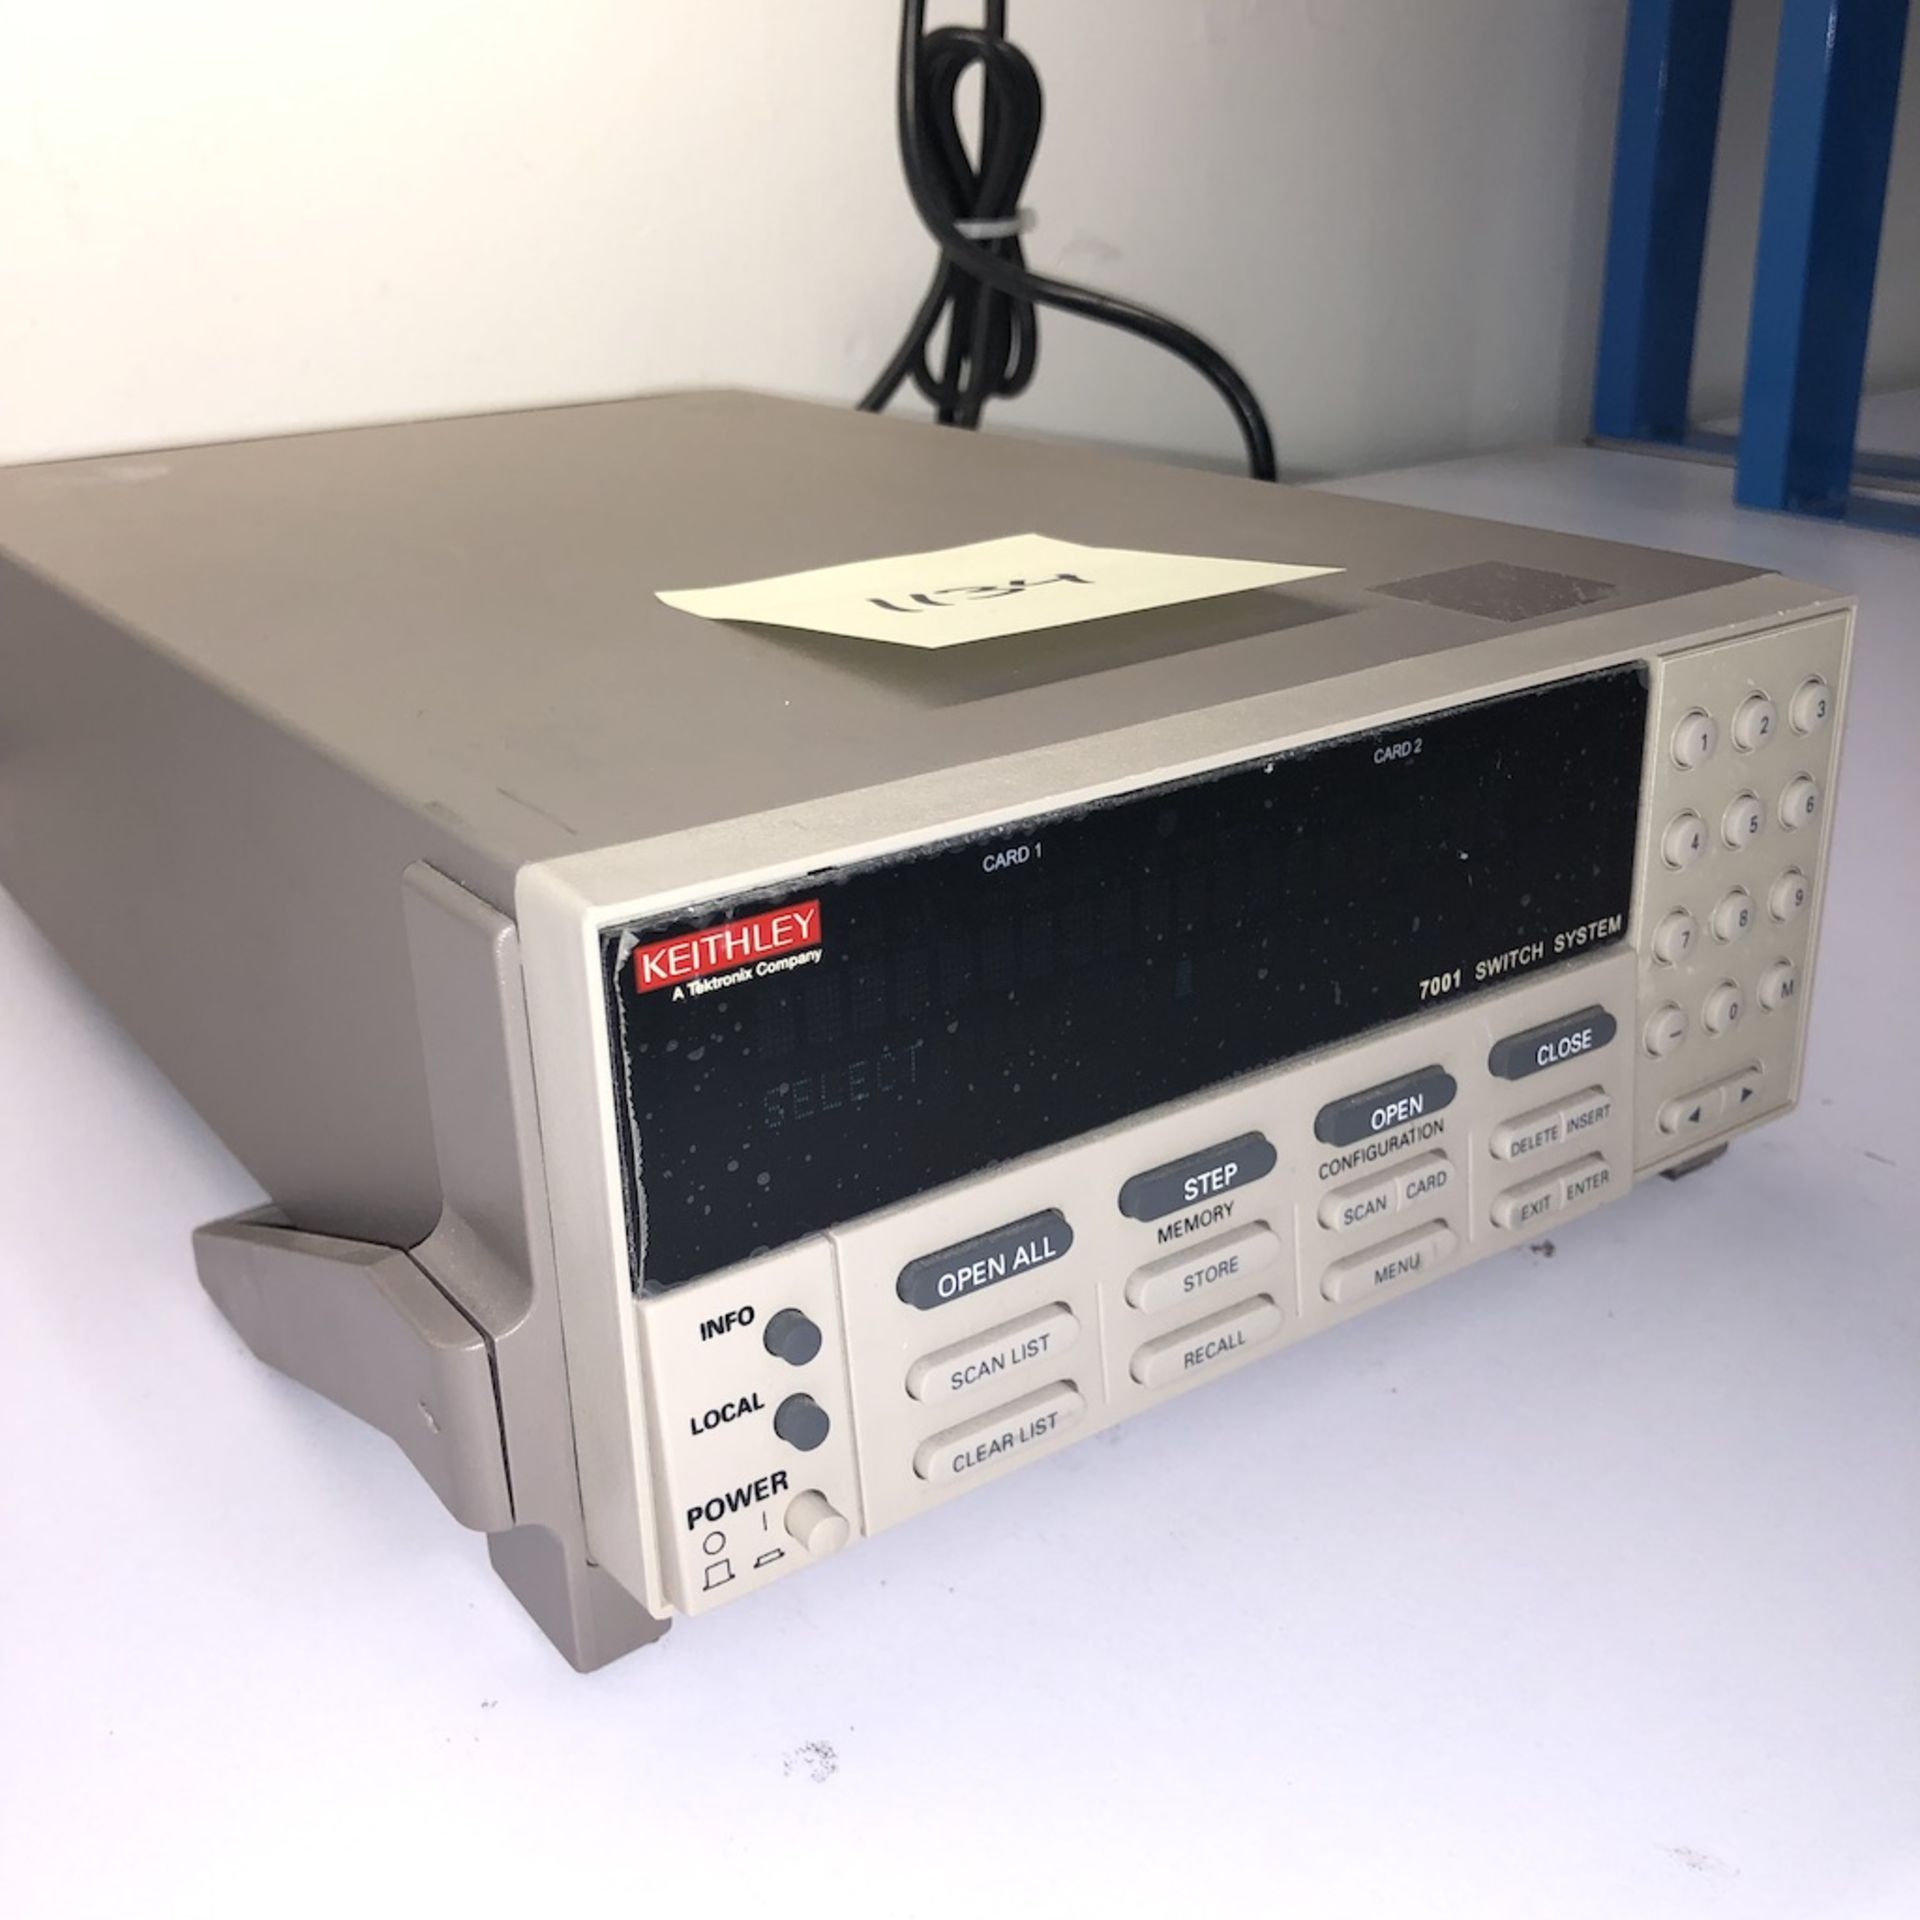 KEITHLEY 7001 SWITCH SYSTEM - Image 2 of 6